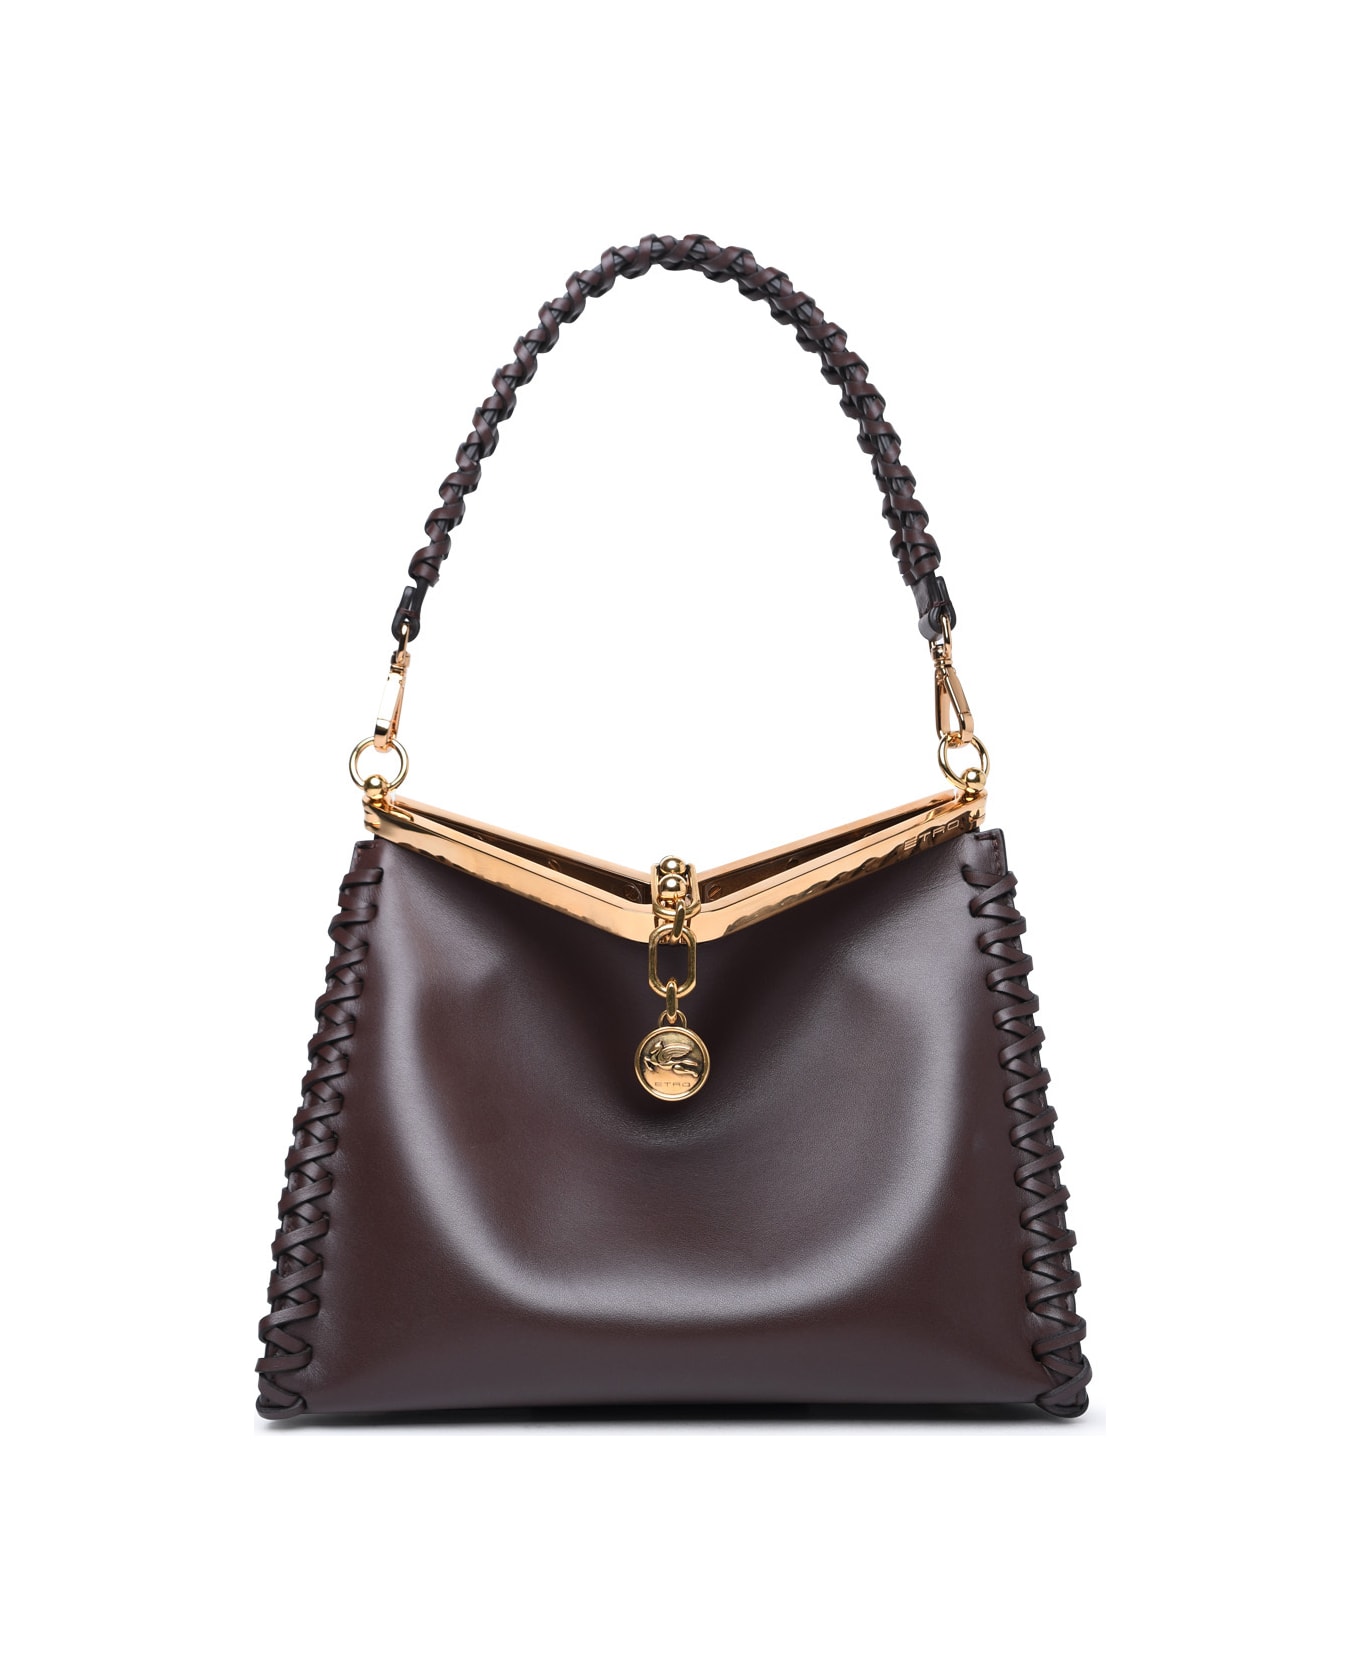 Etro 'vela' Small Brown Leather Bag - Brown